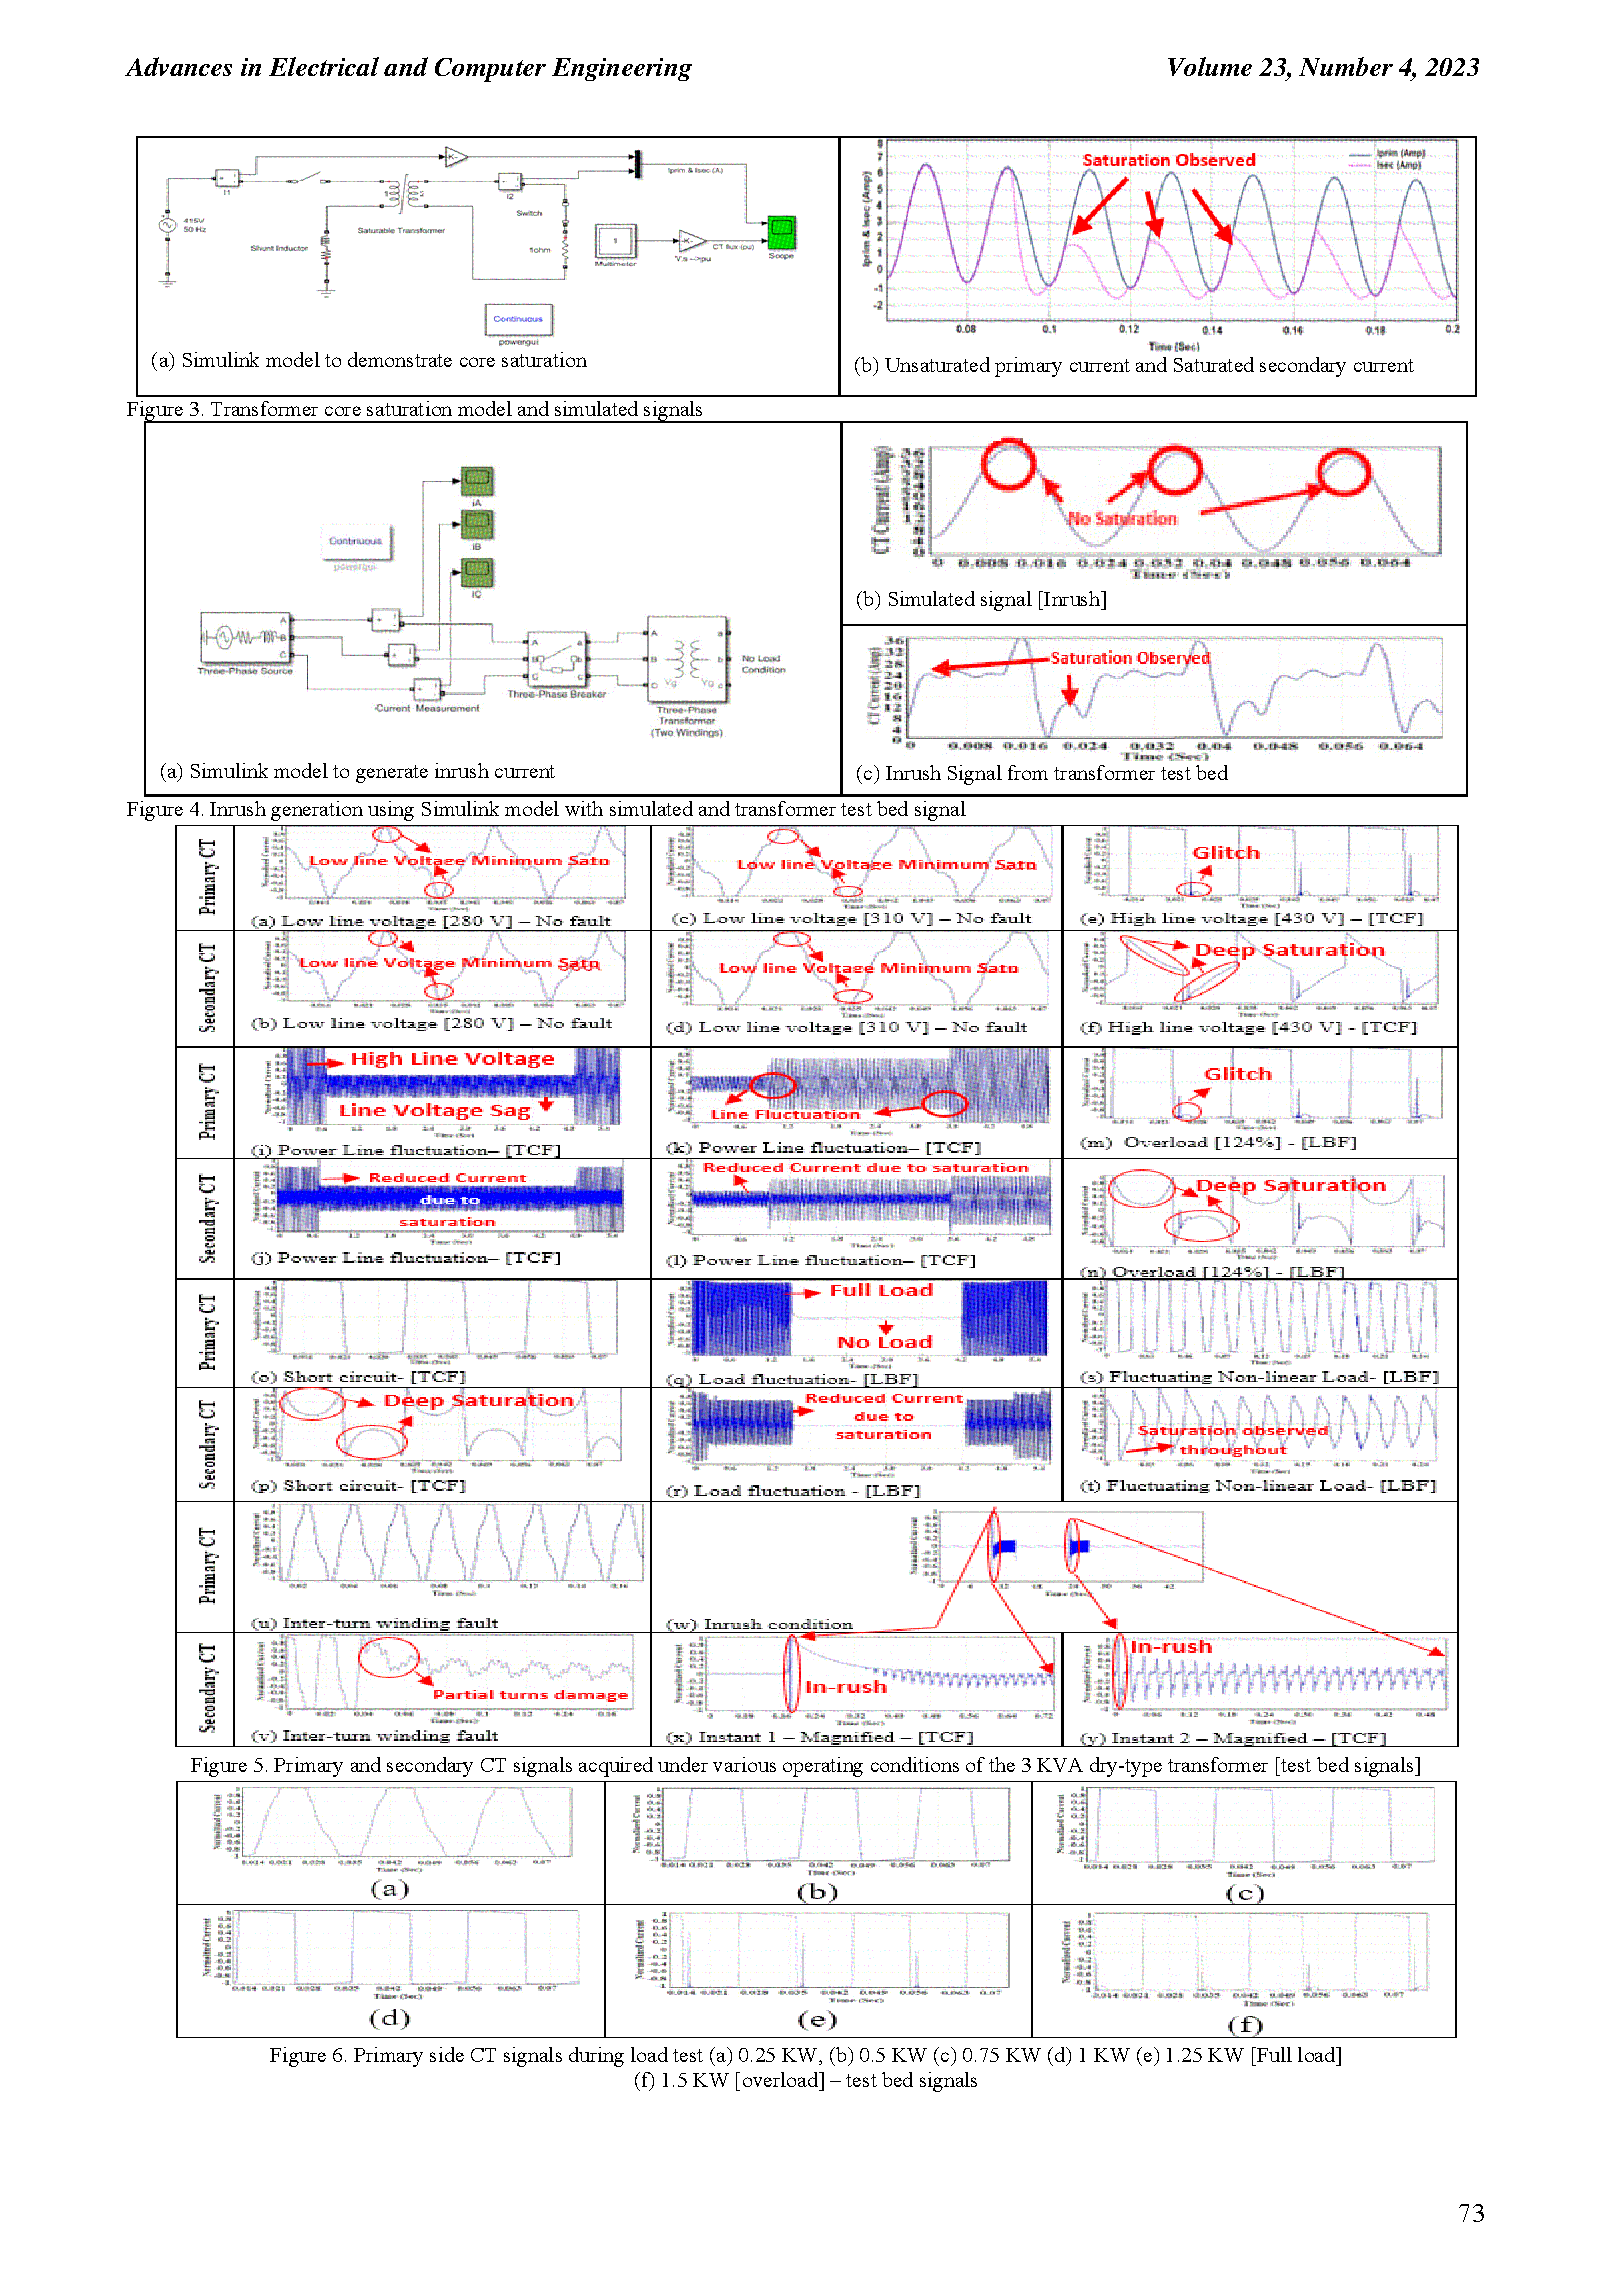 PDF Quickview for paper with DOI:10.4316/AECE.2023.04008